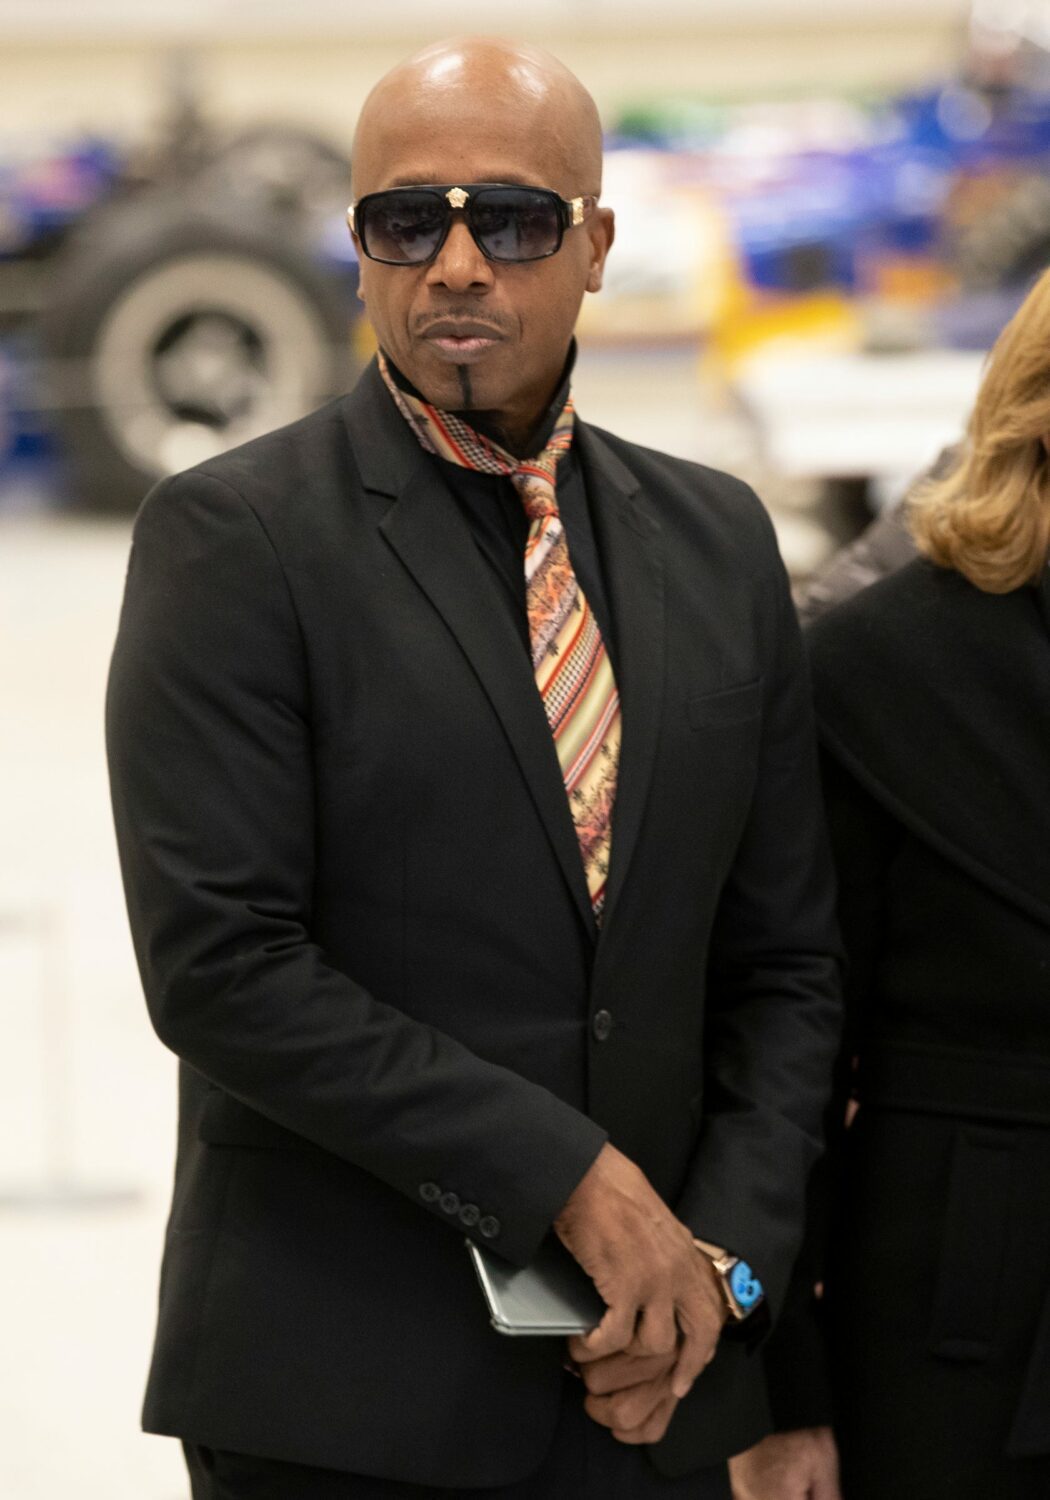 MC Hammer served in the Navy before his music career took off.